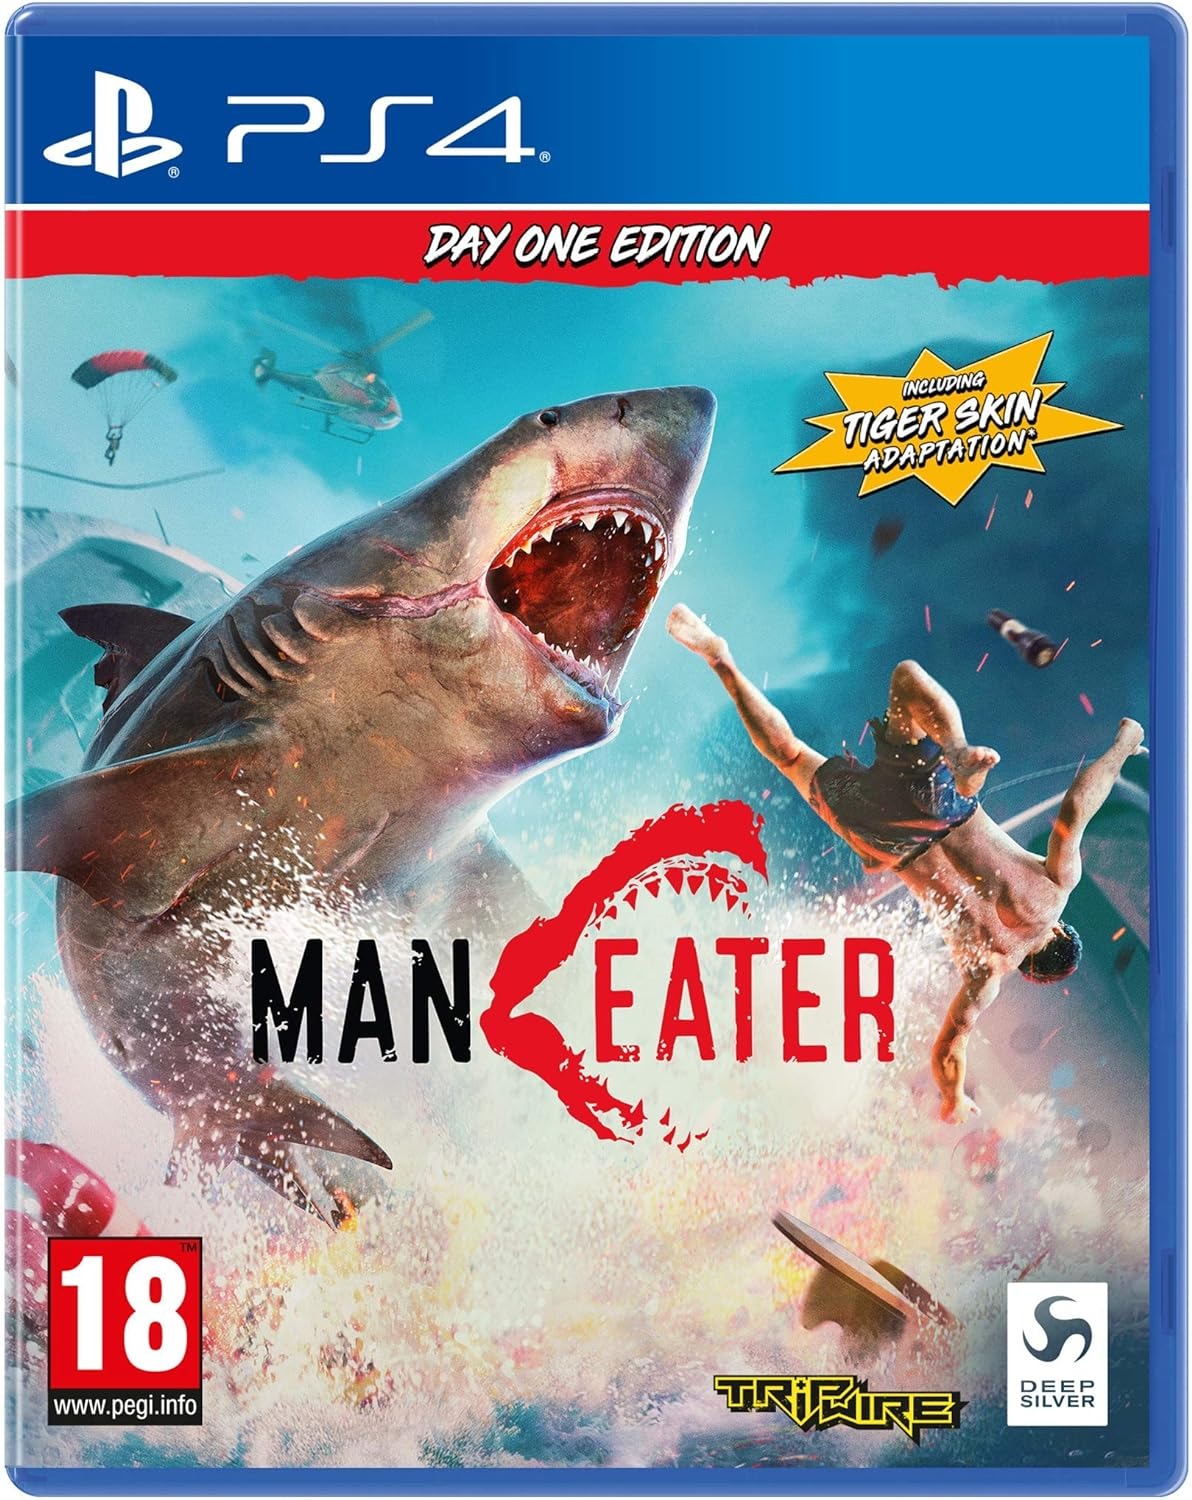 Man Eater Day One Edition - Playstation 4 Title